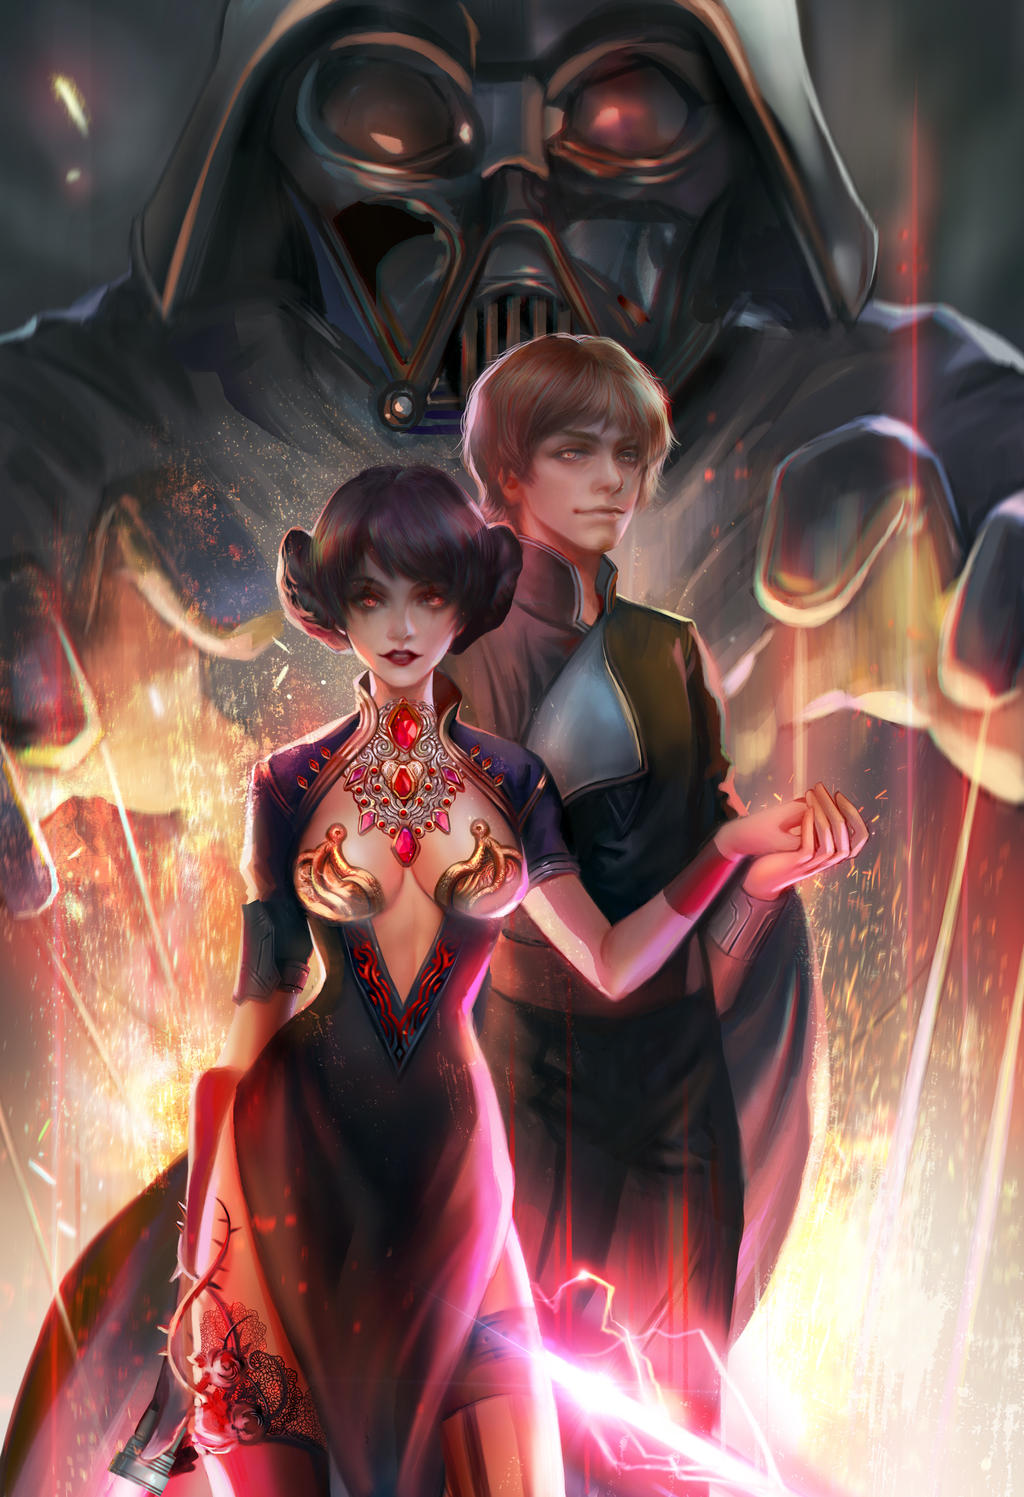 to the dark side of the force by jiuge on DeviantArt